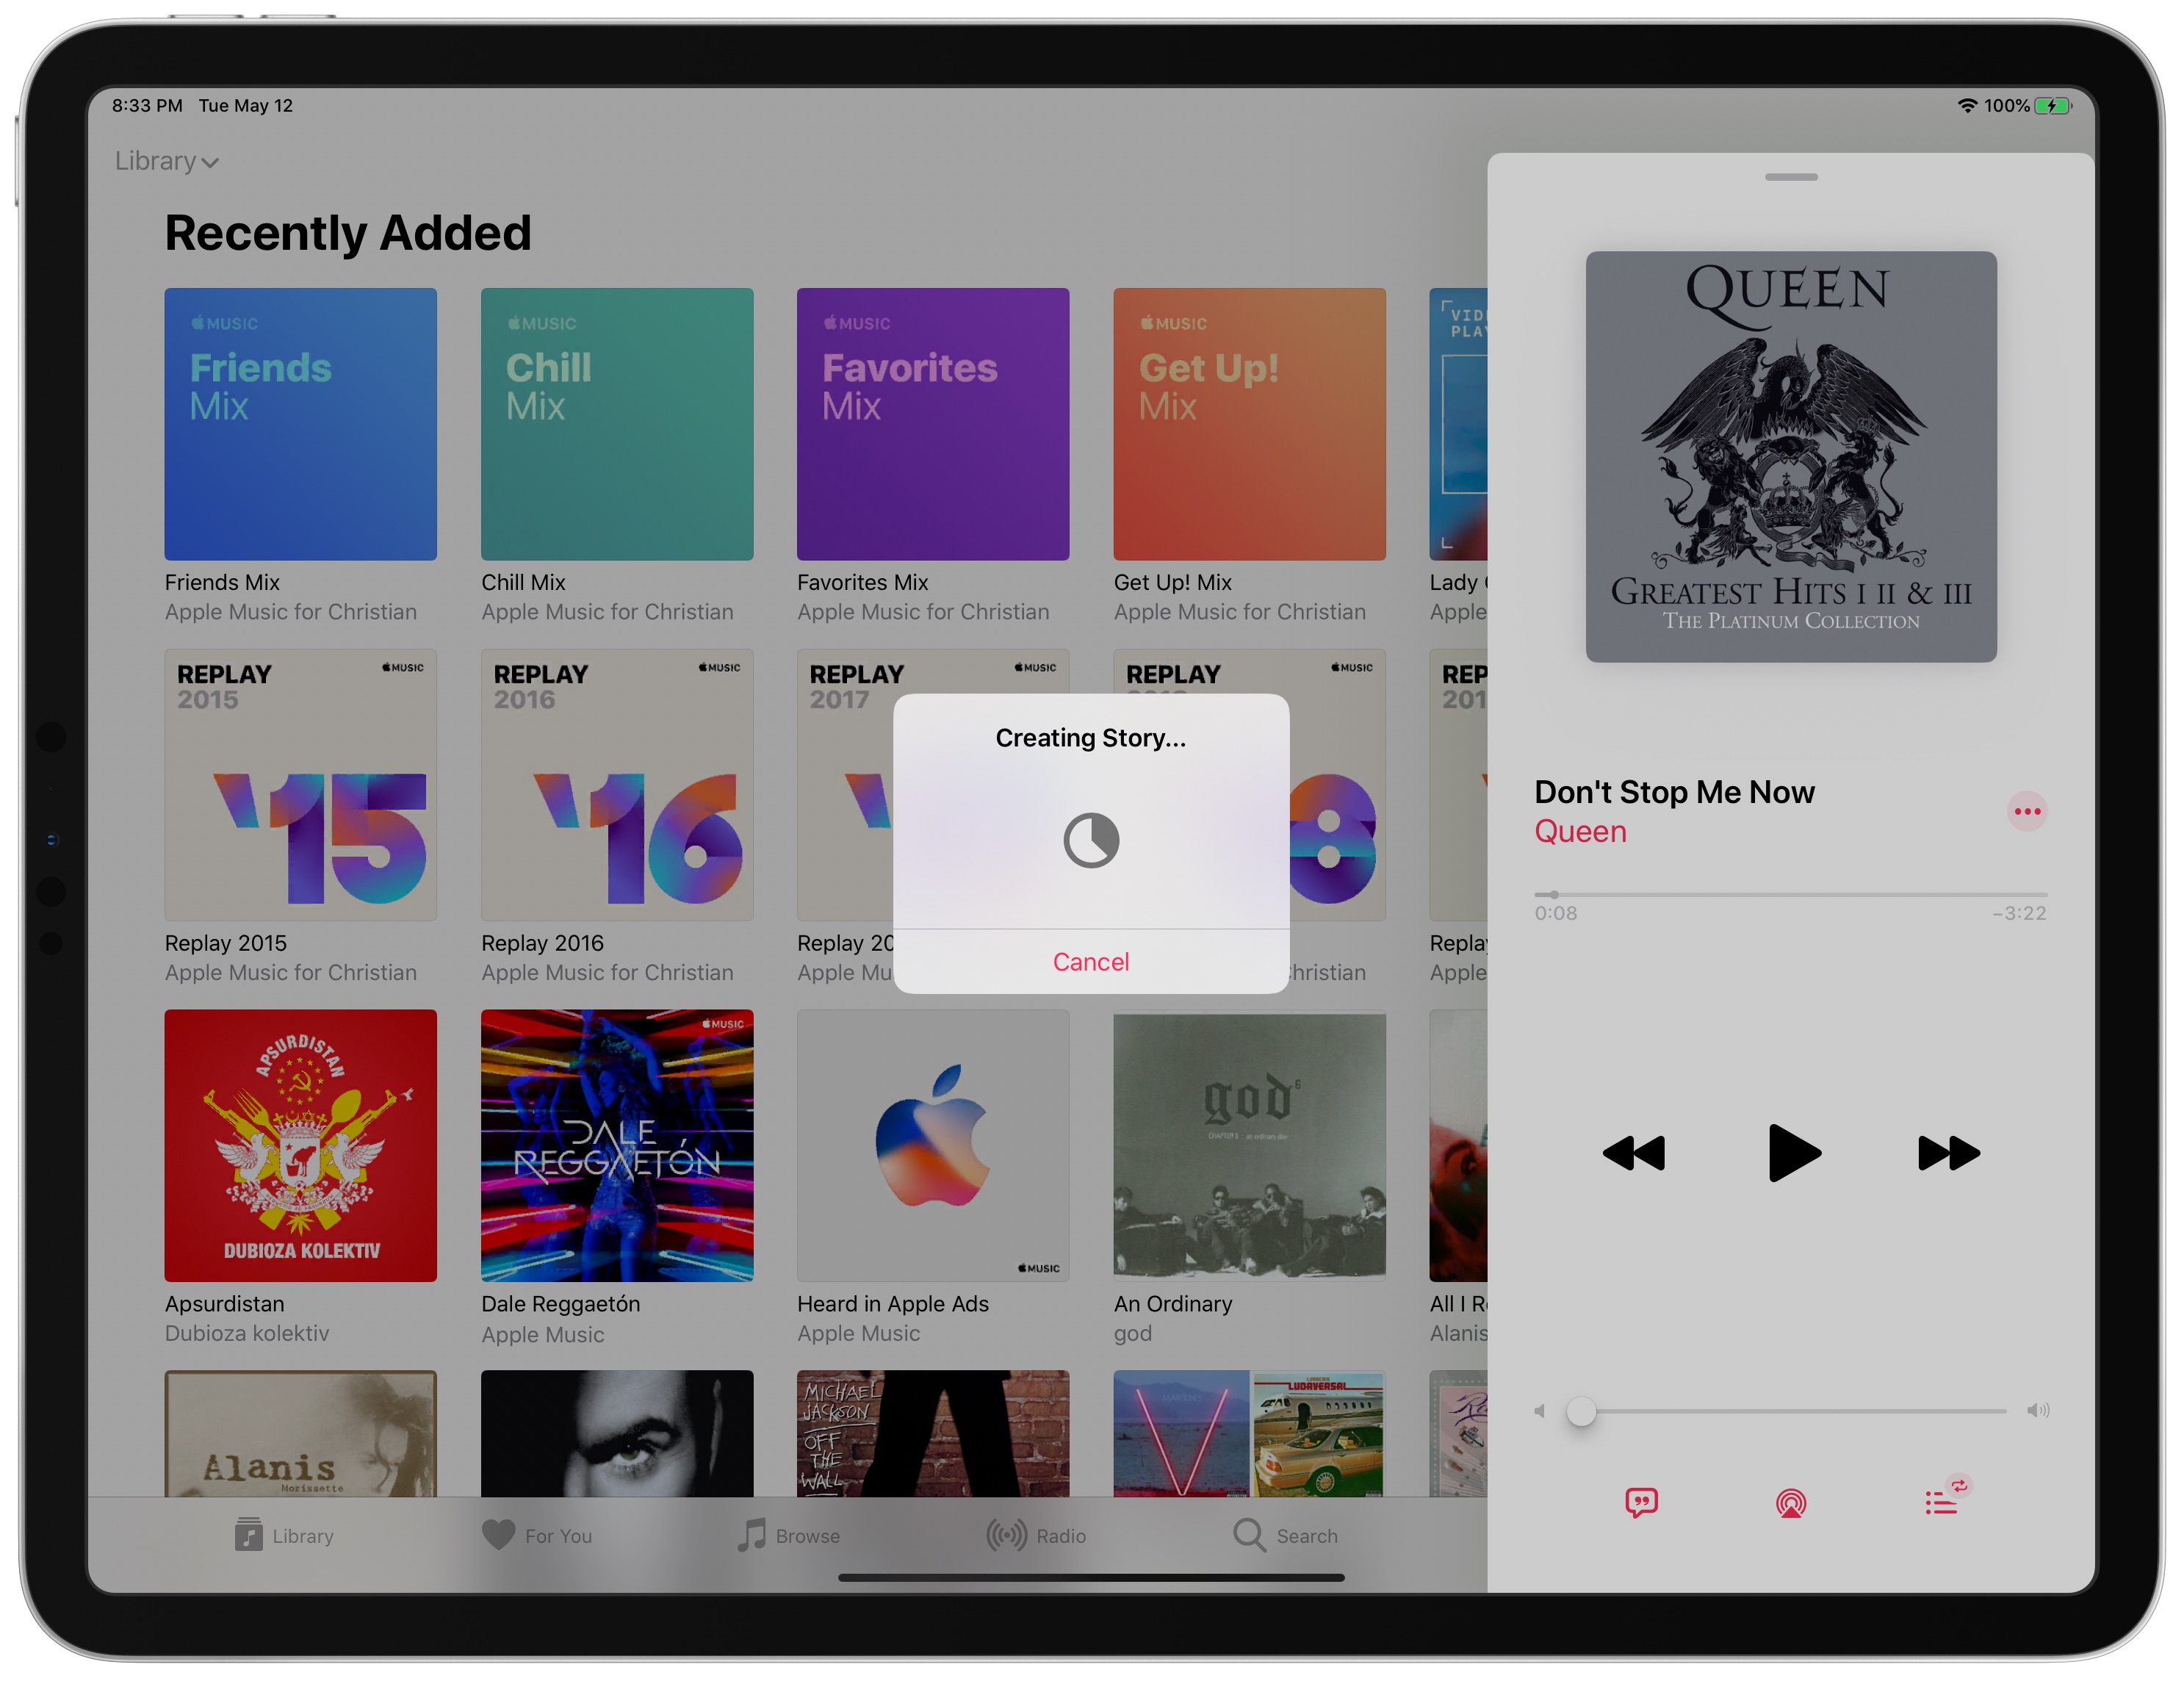 iOS 13.5 iPadOS Apple Music sharing to Instagram and Facebook Stories